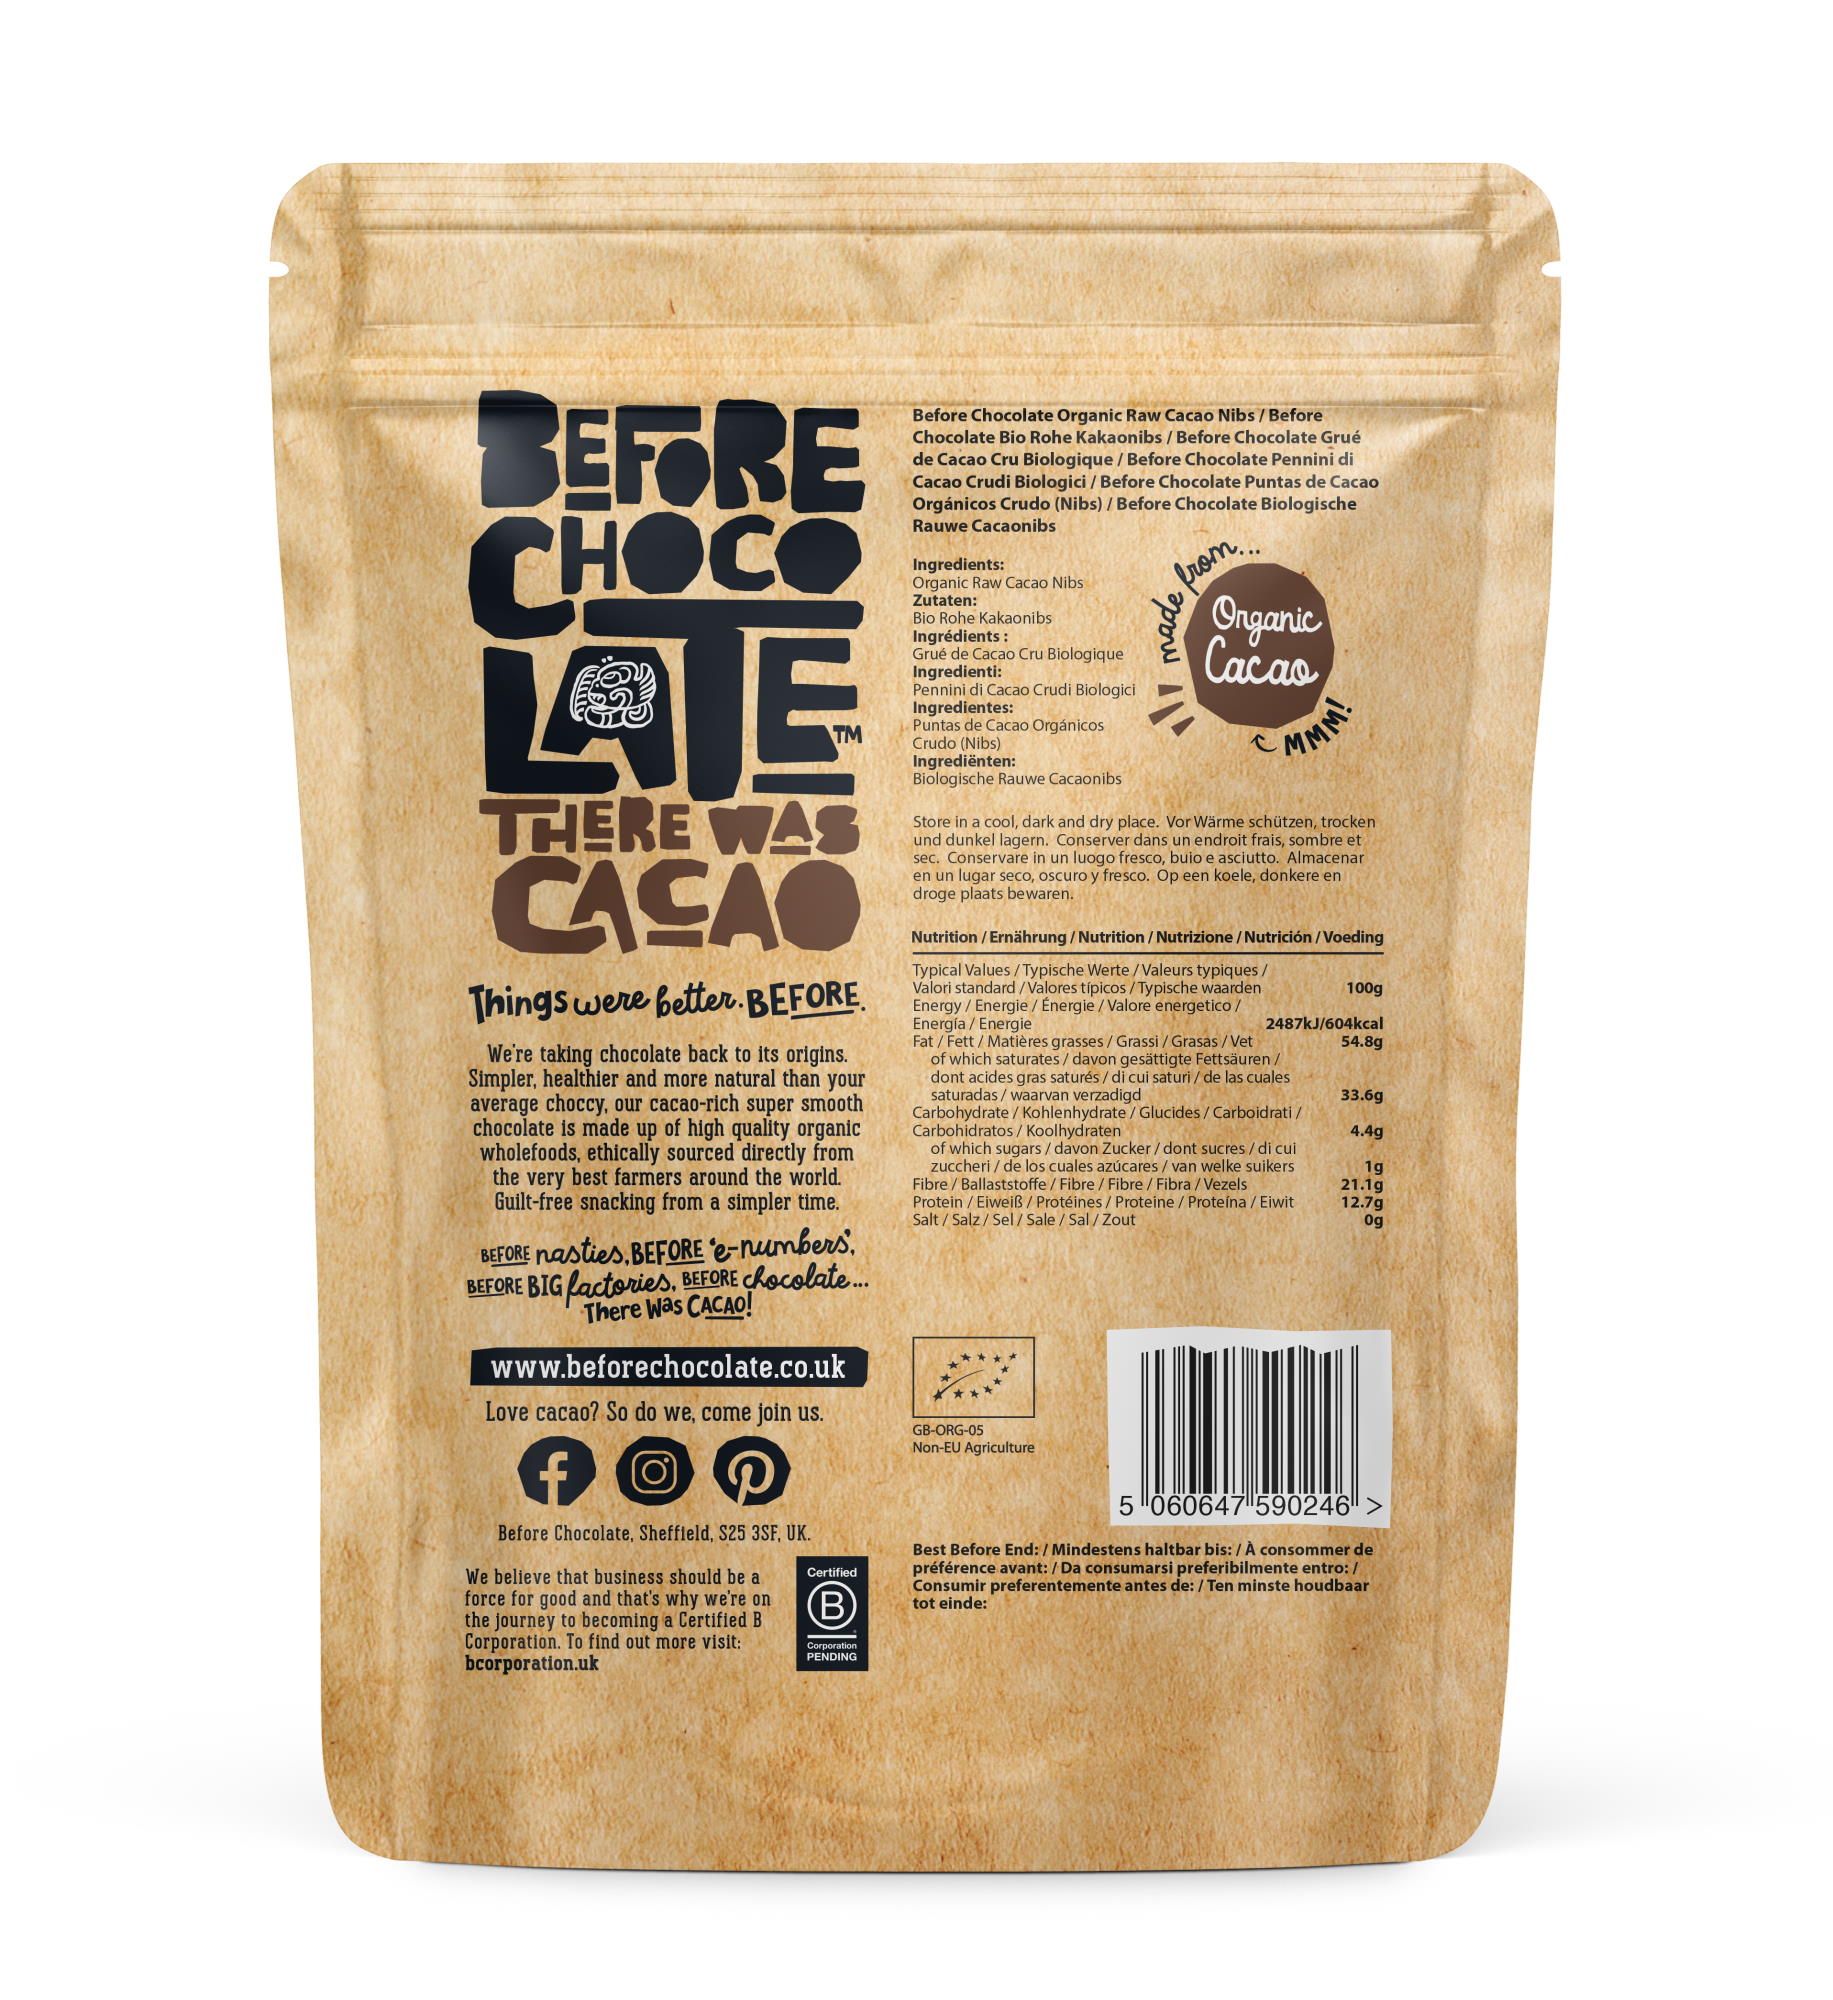 Before Chocolate Organic, Vegan Raw Cacao Nibs (Back of Pack)